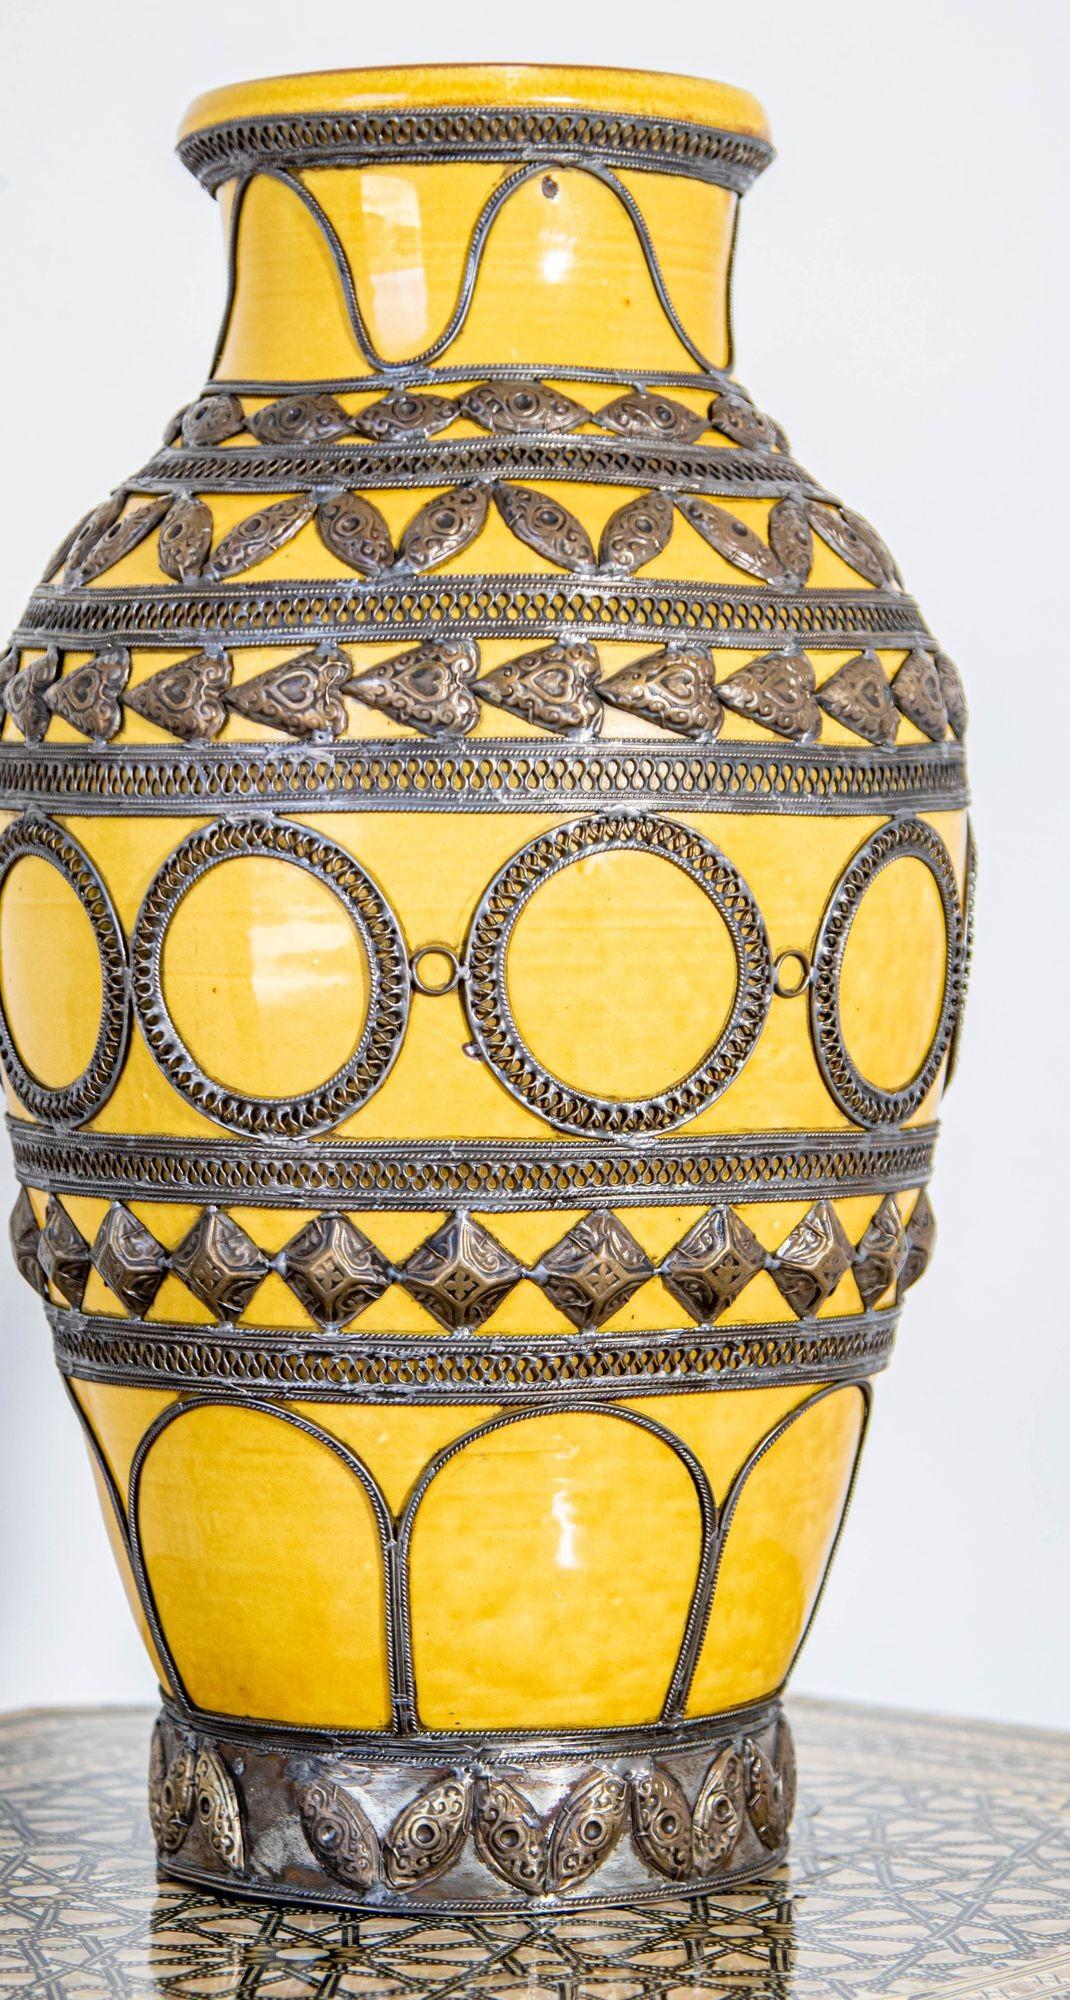 Hand-Crafted Antique Moroccan Ceramic Vase Bright Yellow with Metal Moorish Filigree overlaid For Sale